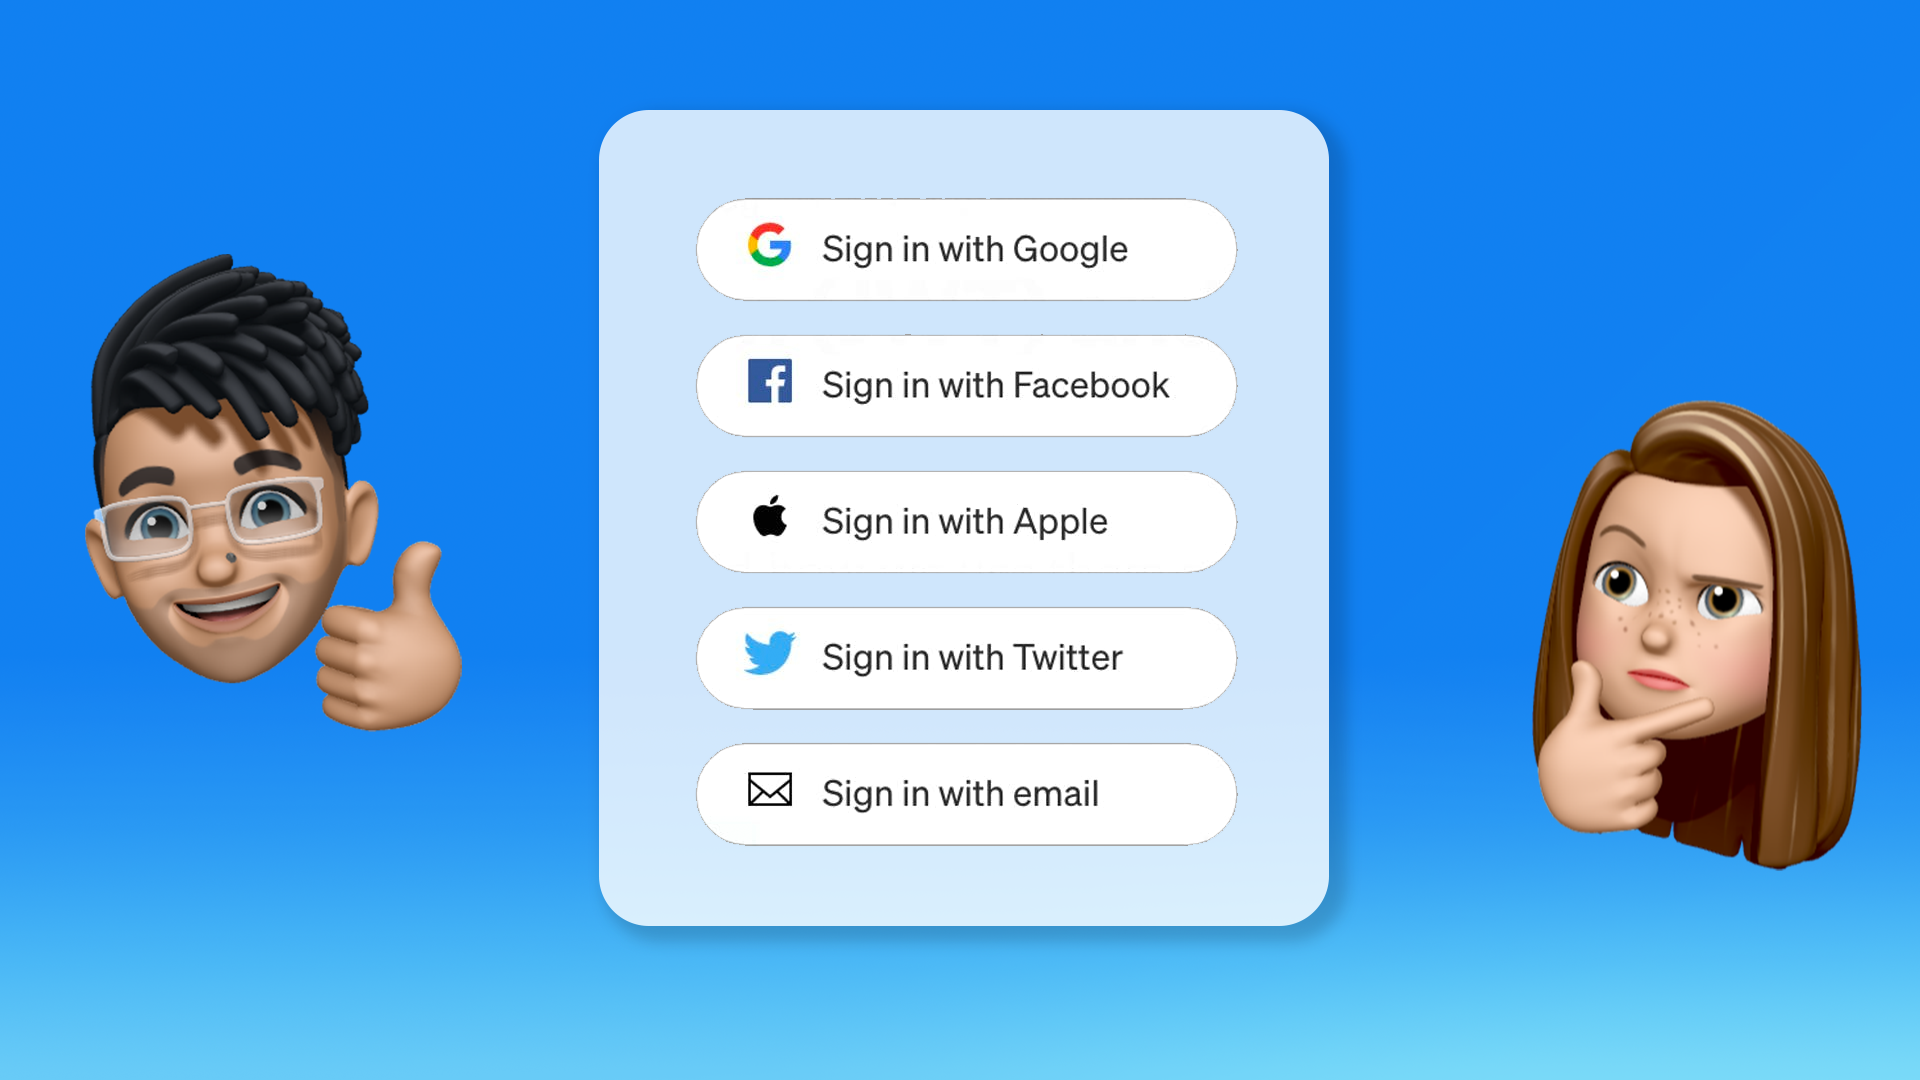 Pros & Cons of Using Facebook or Google for Logins - TSTS 